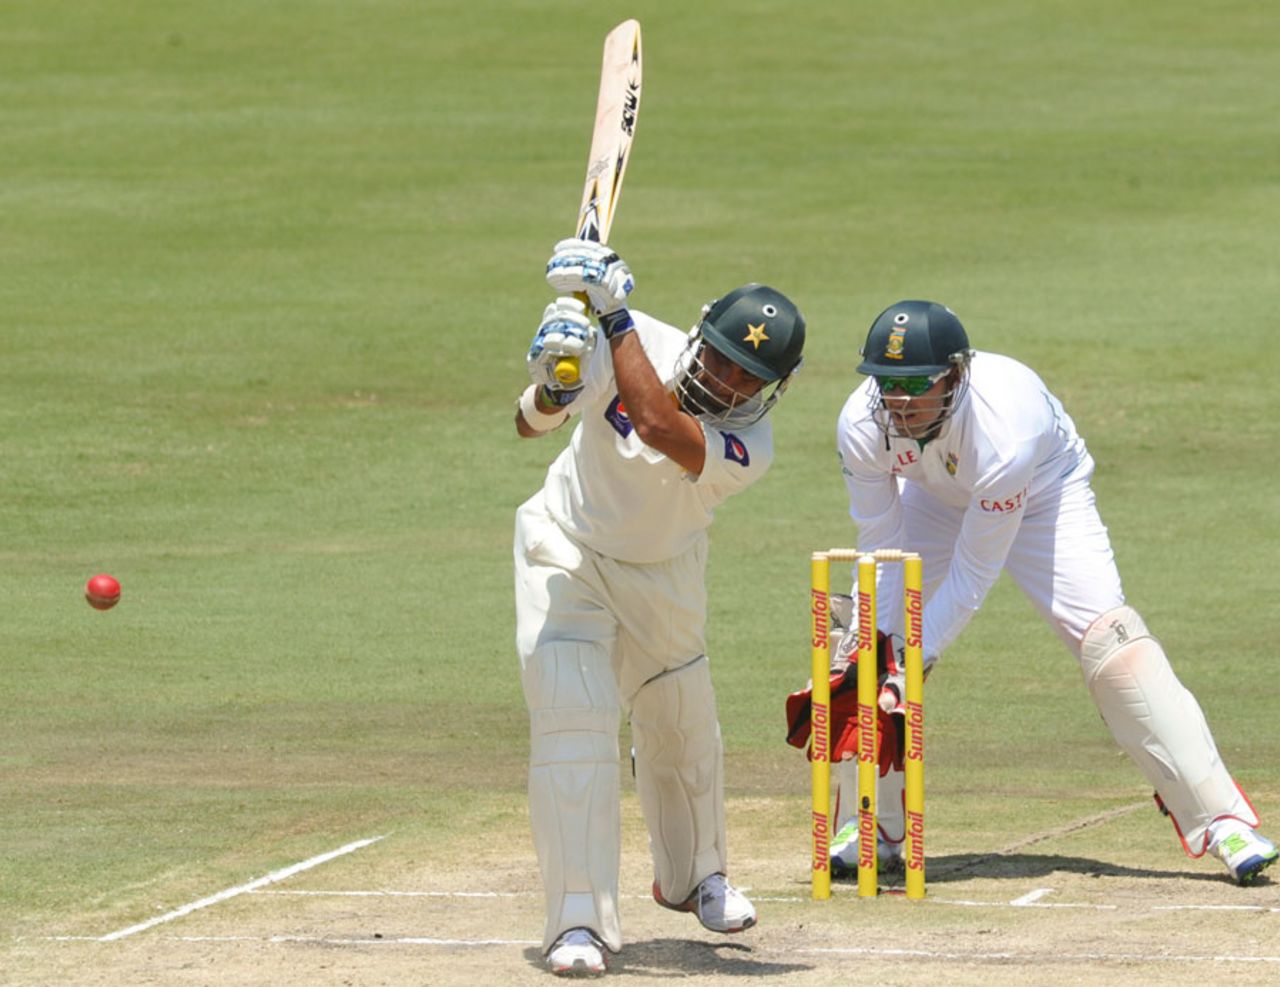 Imran Farhat plays to the leg side, South Africa v Pakistan, 3rd Test, Centurion, 3rd day, February 24, 2013